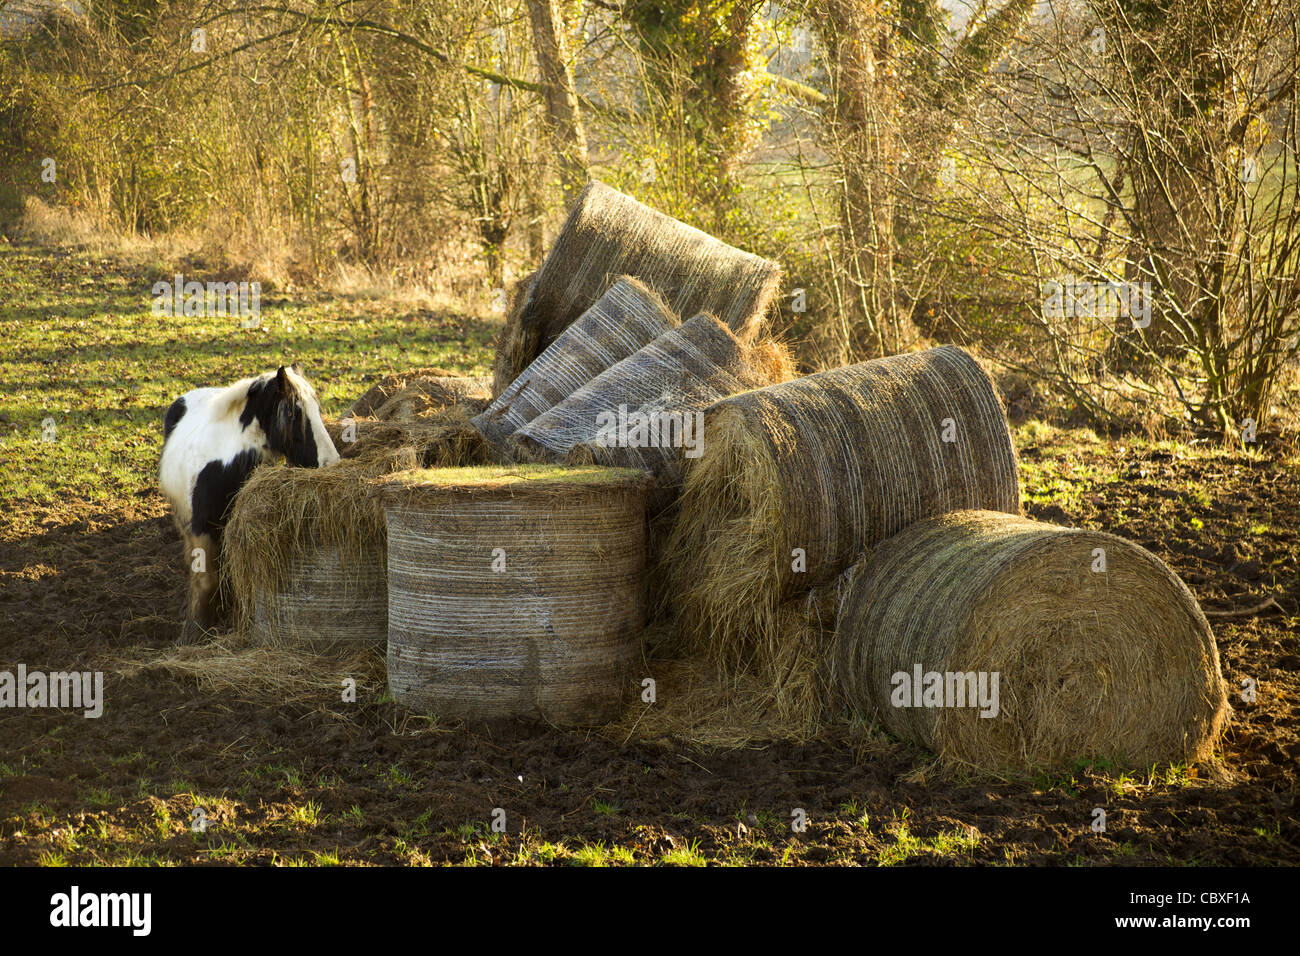 Bales of hay in the winter sun, England Stock Photo